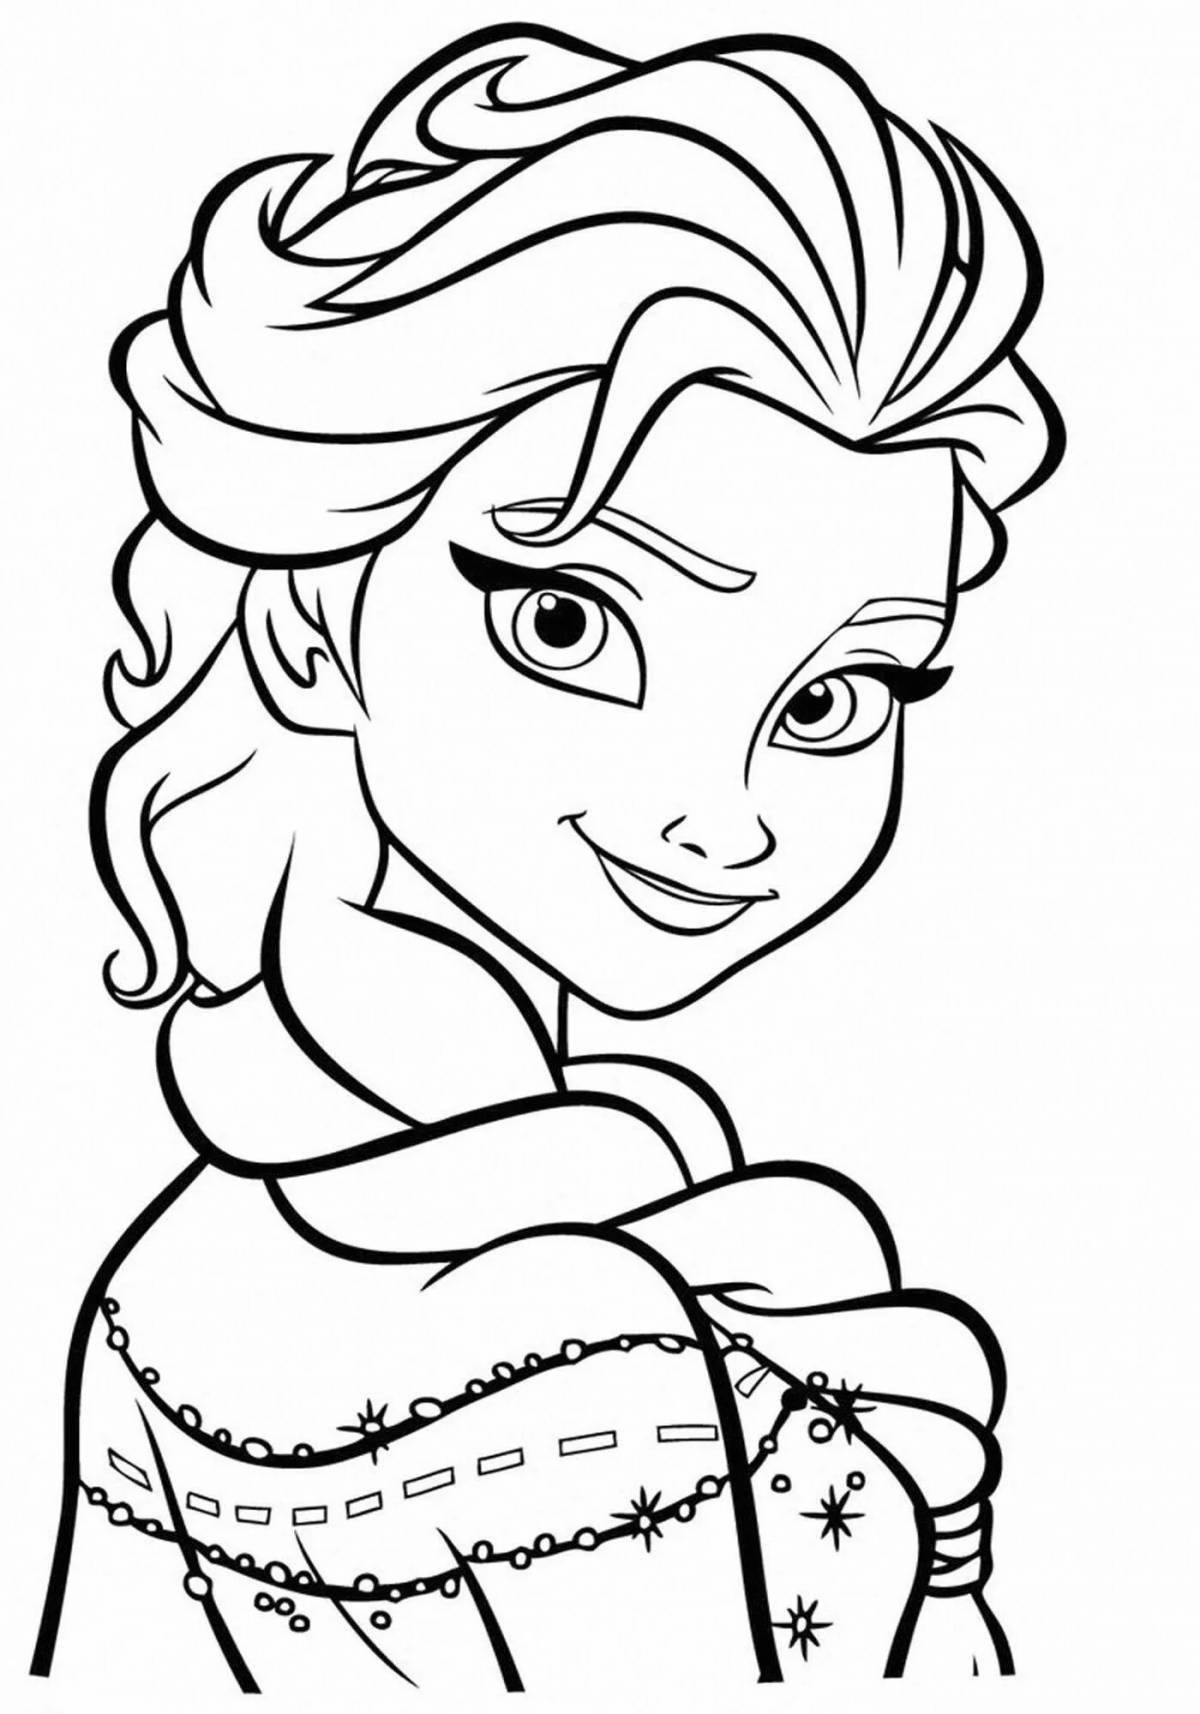 Elsa fairytale coloring book for kids 3-4 years old